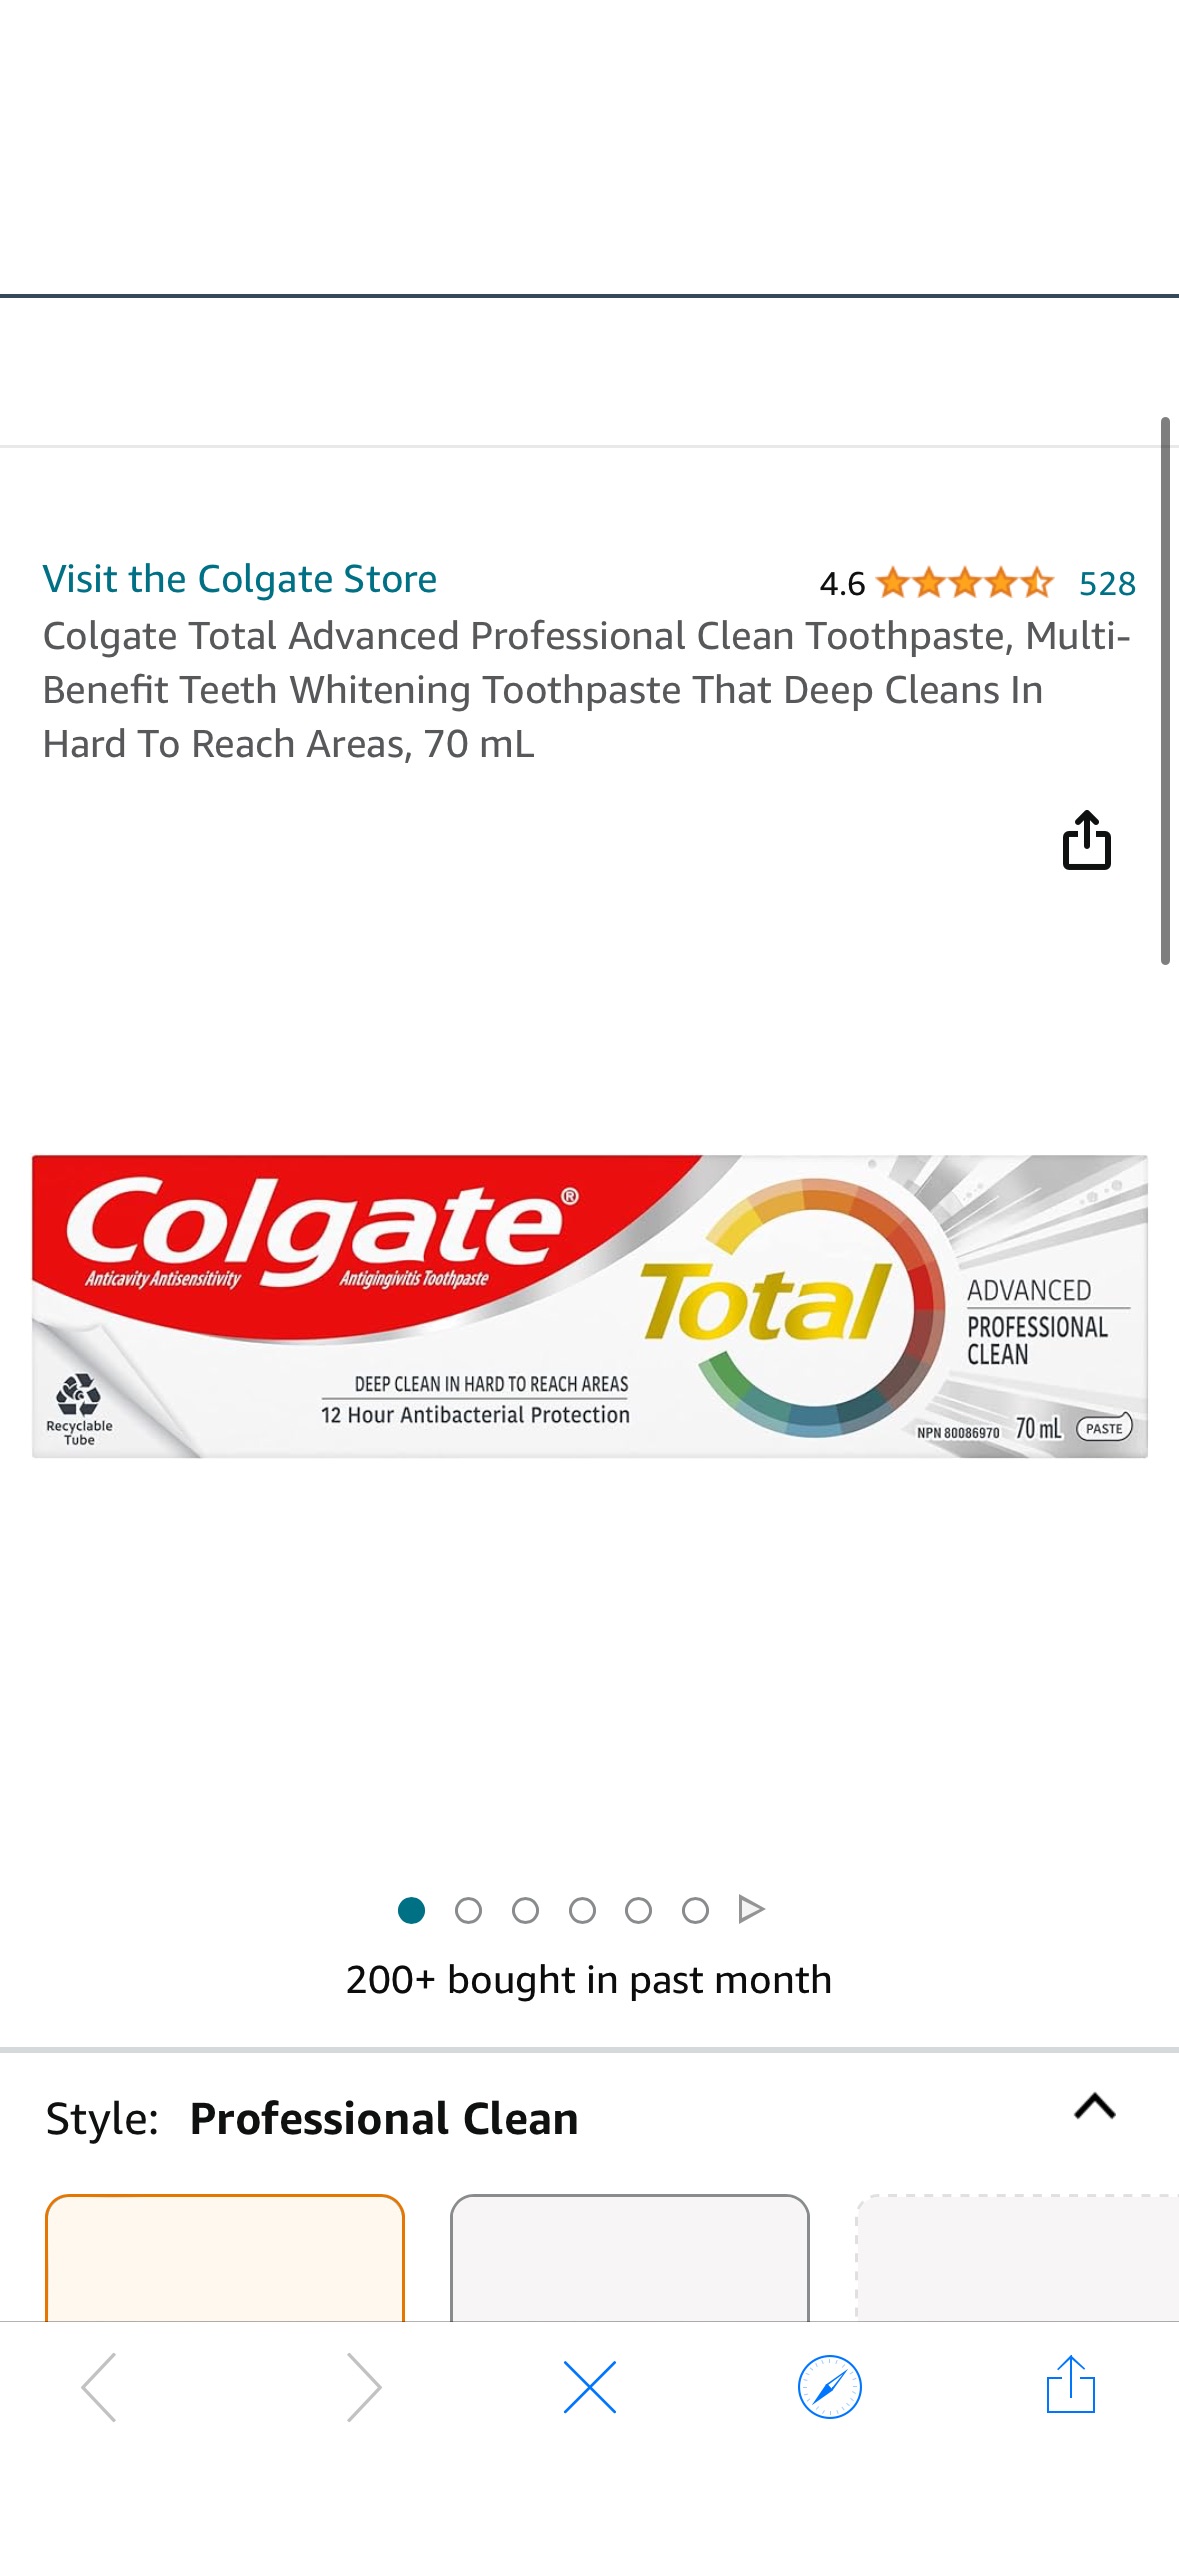 Colgate Total Advanced Professional Clean Toothpaste, Multi-Benefit Teeth Whitening Toothpaste That Deep Cleans In Hard To Reach Areas, 70 mL : Amazon.ca: Health & Personal Care